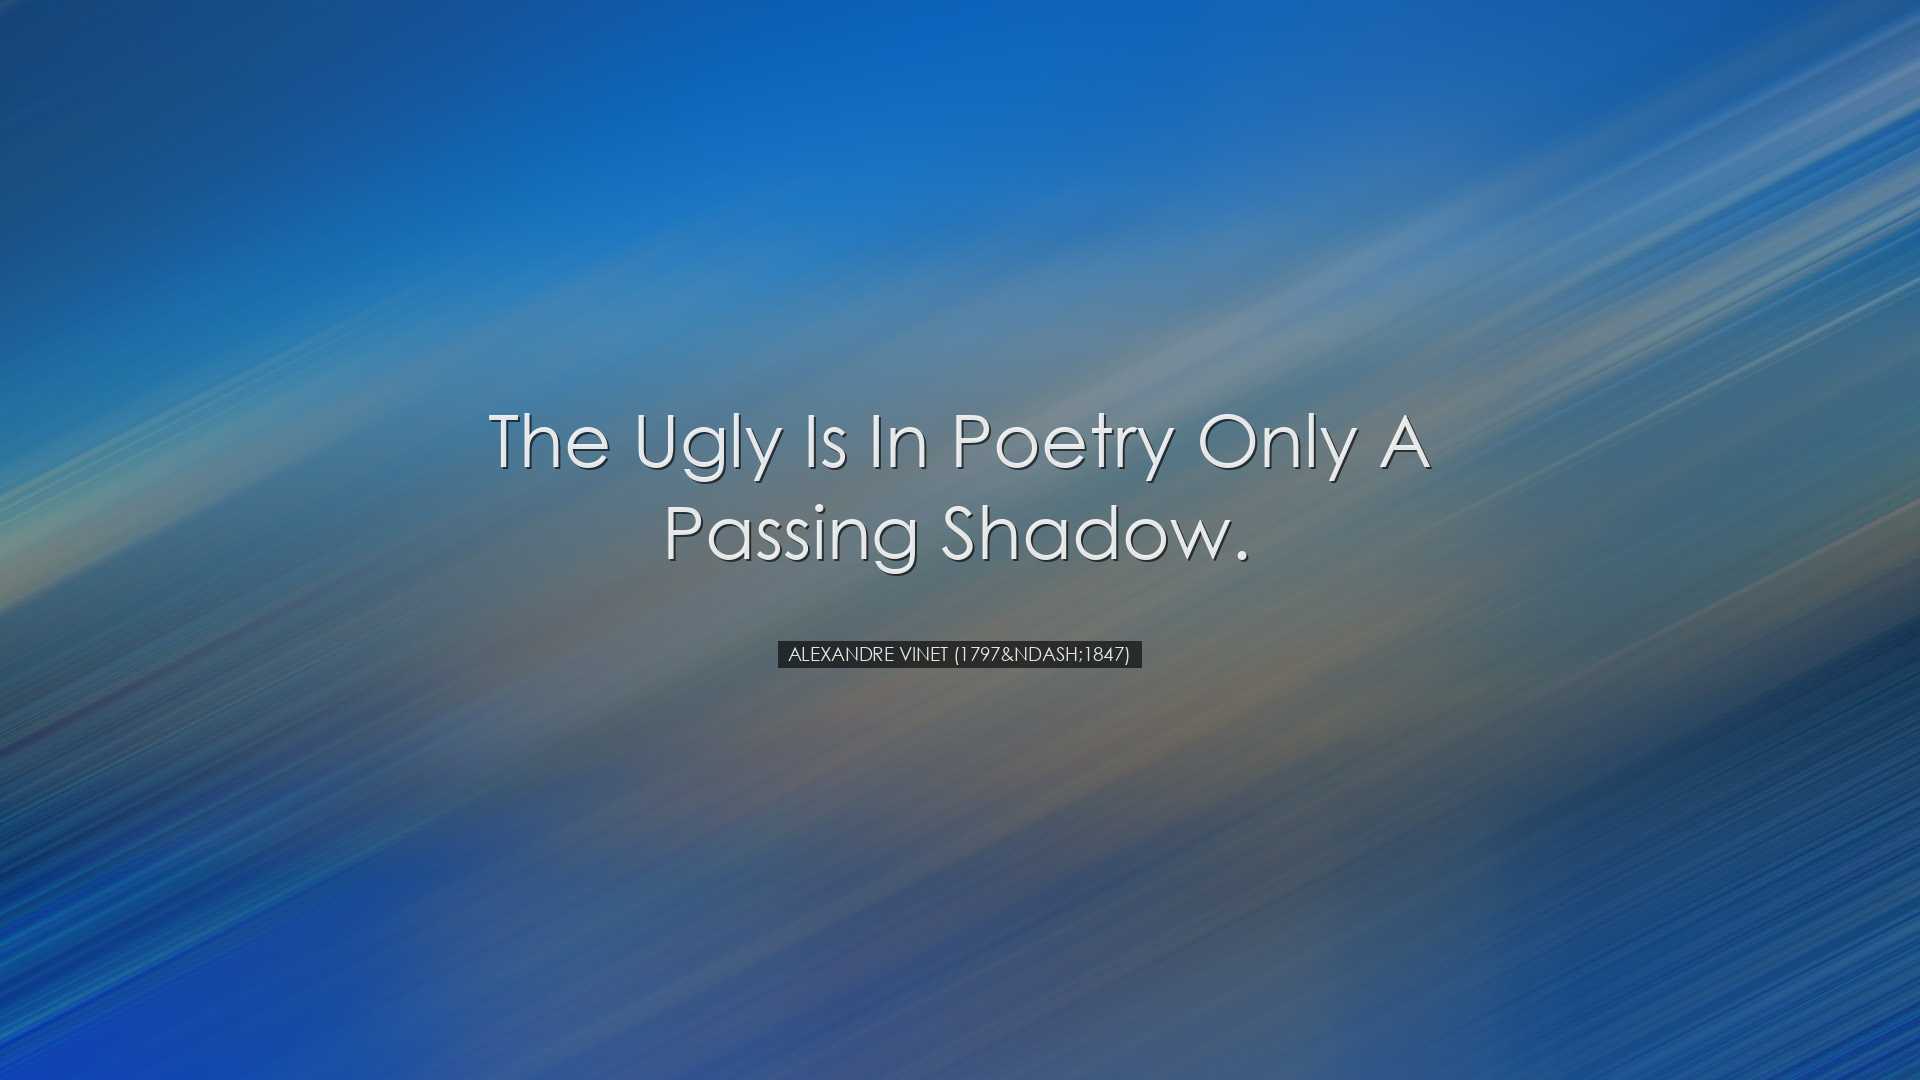 The ugly is in poetry only a passing shadow. - Alexandre Vinet (17